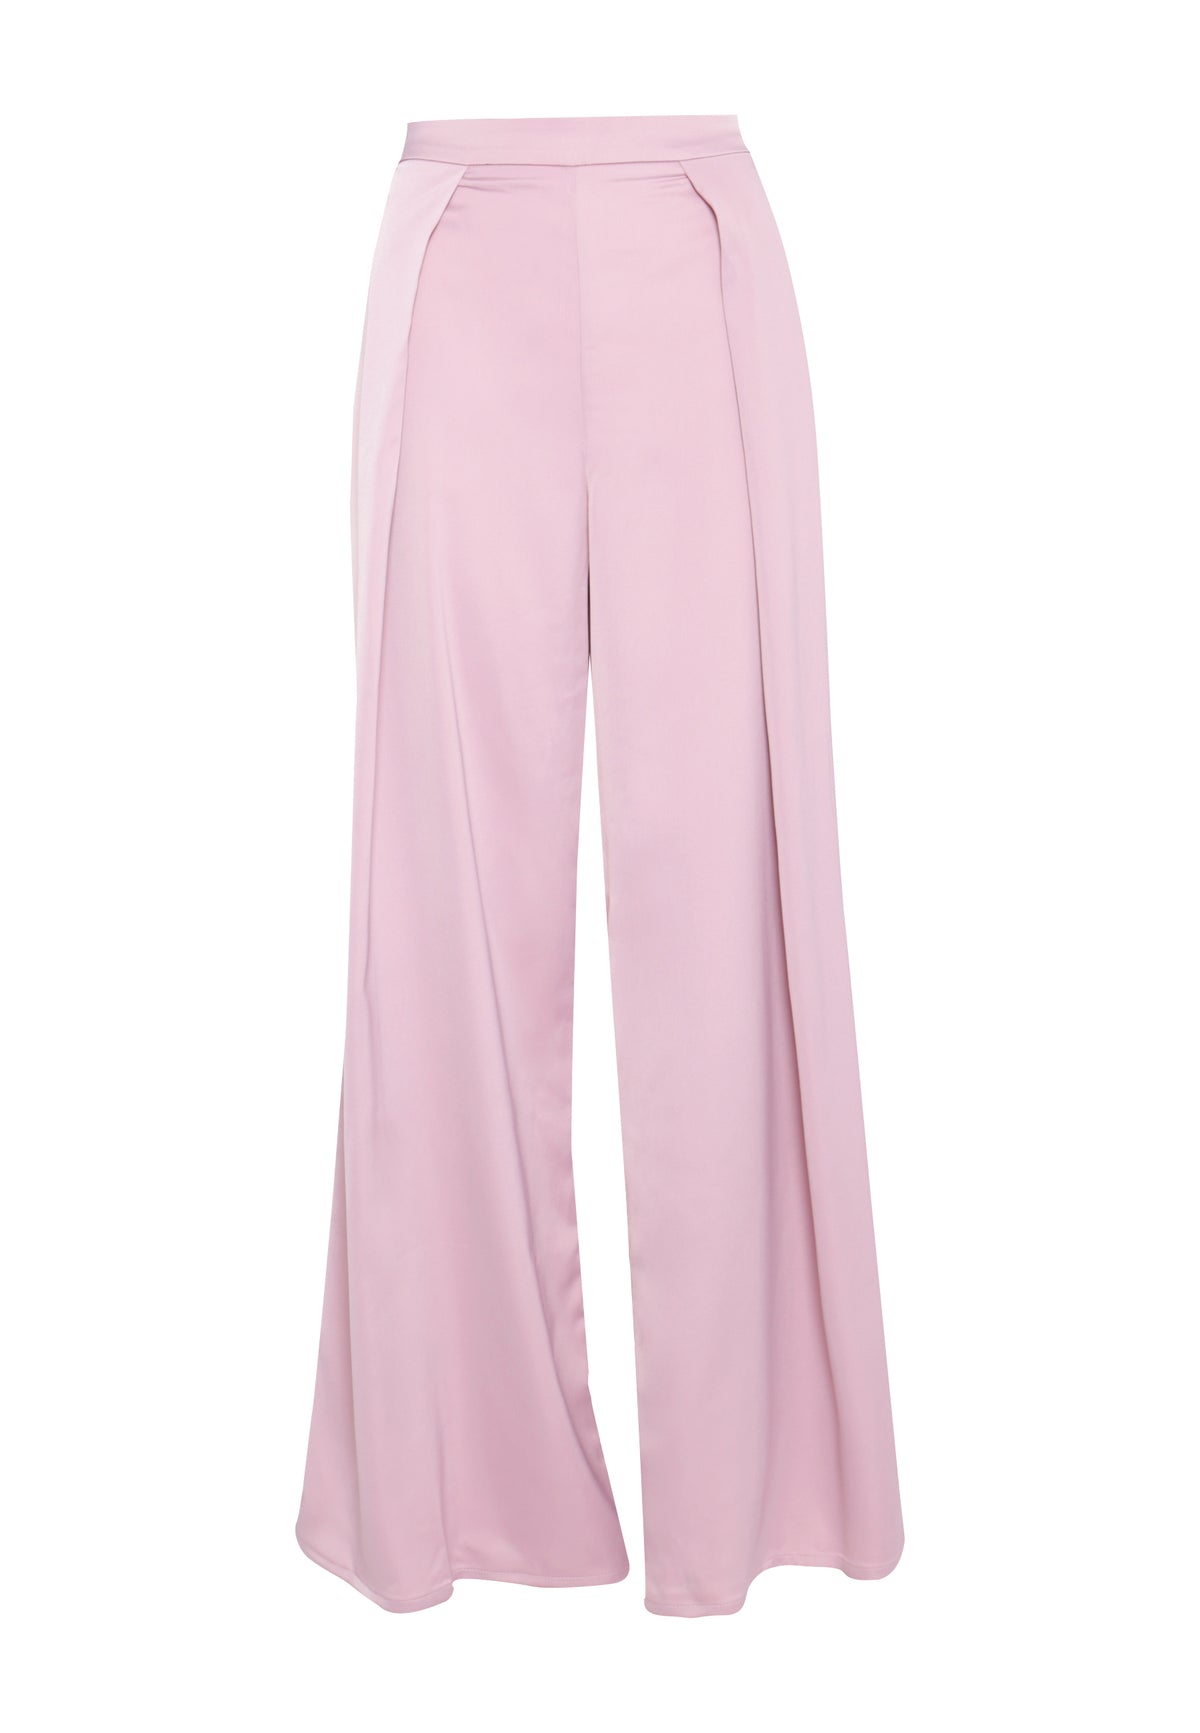 Glamorous Dusted Pink Satin Wide Leg Trousers